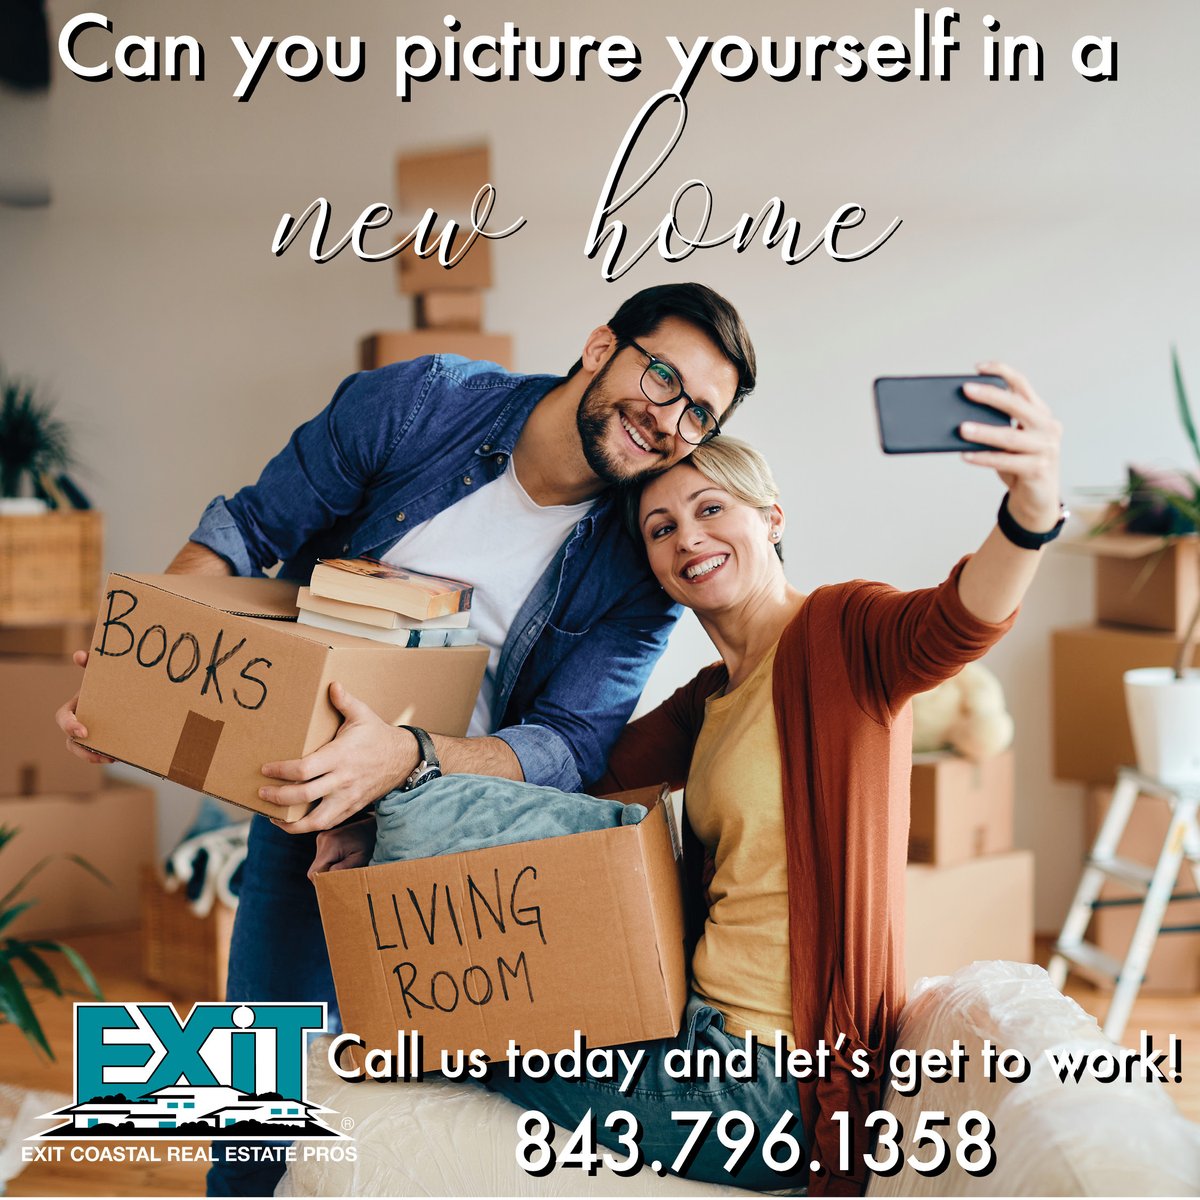 Can you picture yourself in a new home? Call us today, we are here to help.
#EXITCoastalRealEstatePros #EXITRealEstate #SCHomes #RealEstate #SoldWithStyle #HomeBuyingMadeEasy #EXITRealty #EXITCRP #MyrtleBeachRealEstate #EXITRealtyIsGrowing #EXITisEverywhere #LoveEXIT...